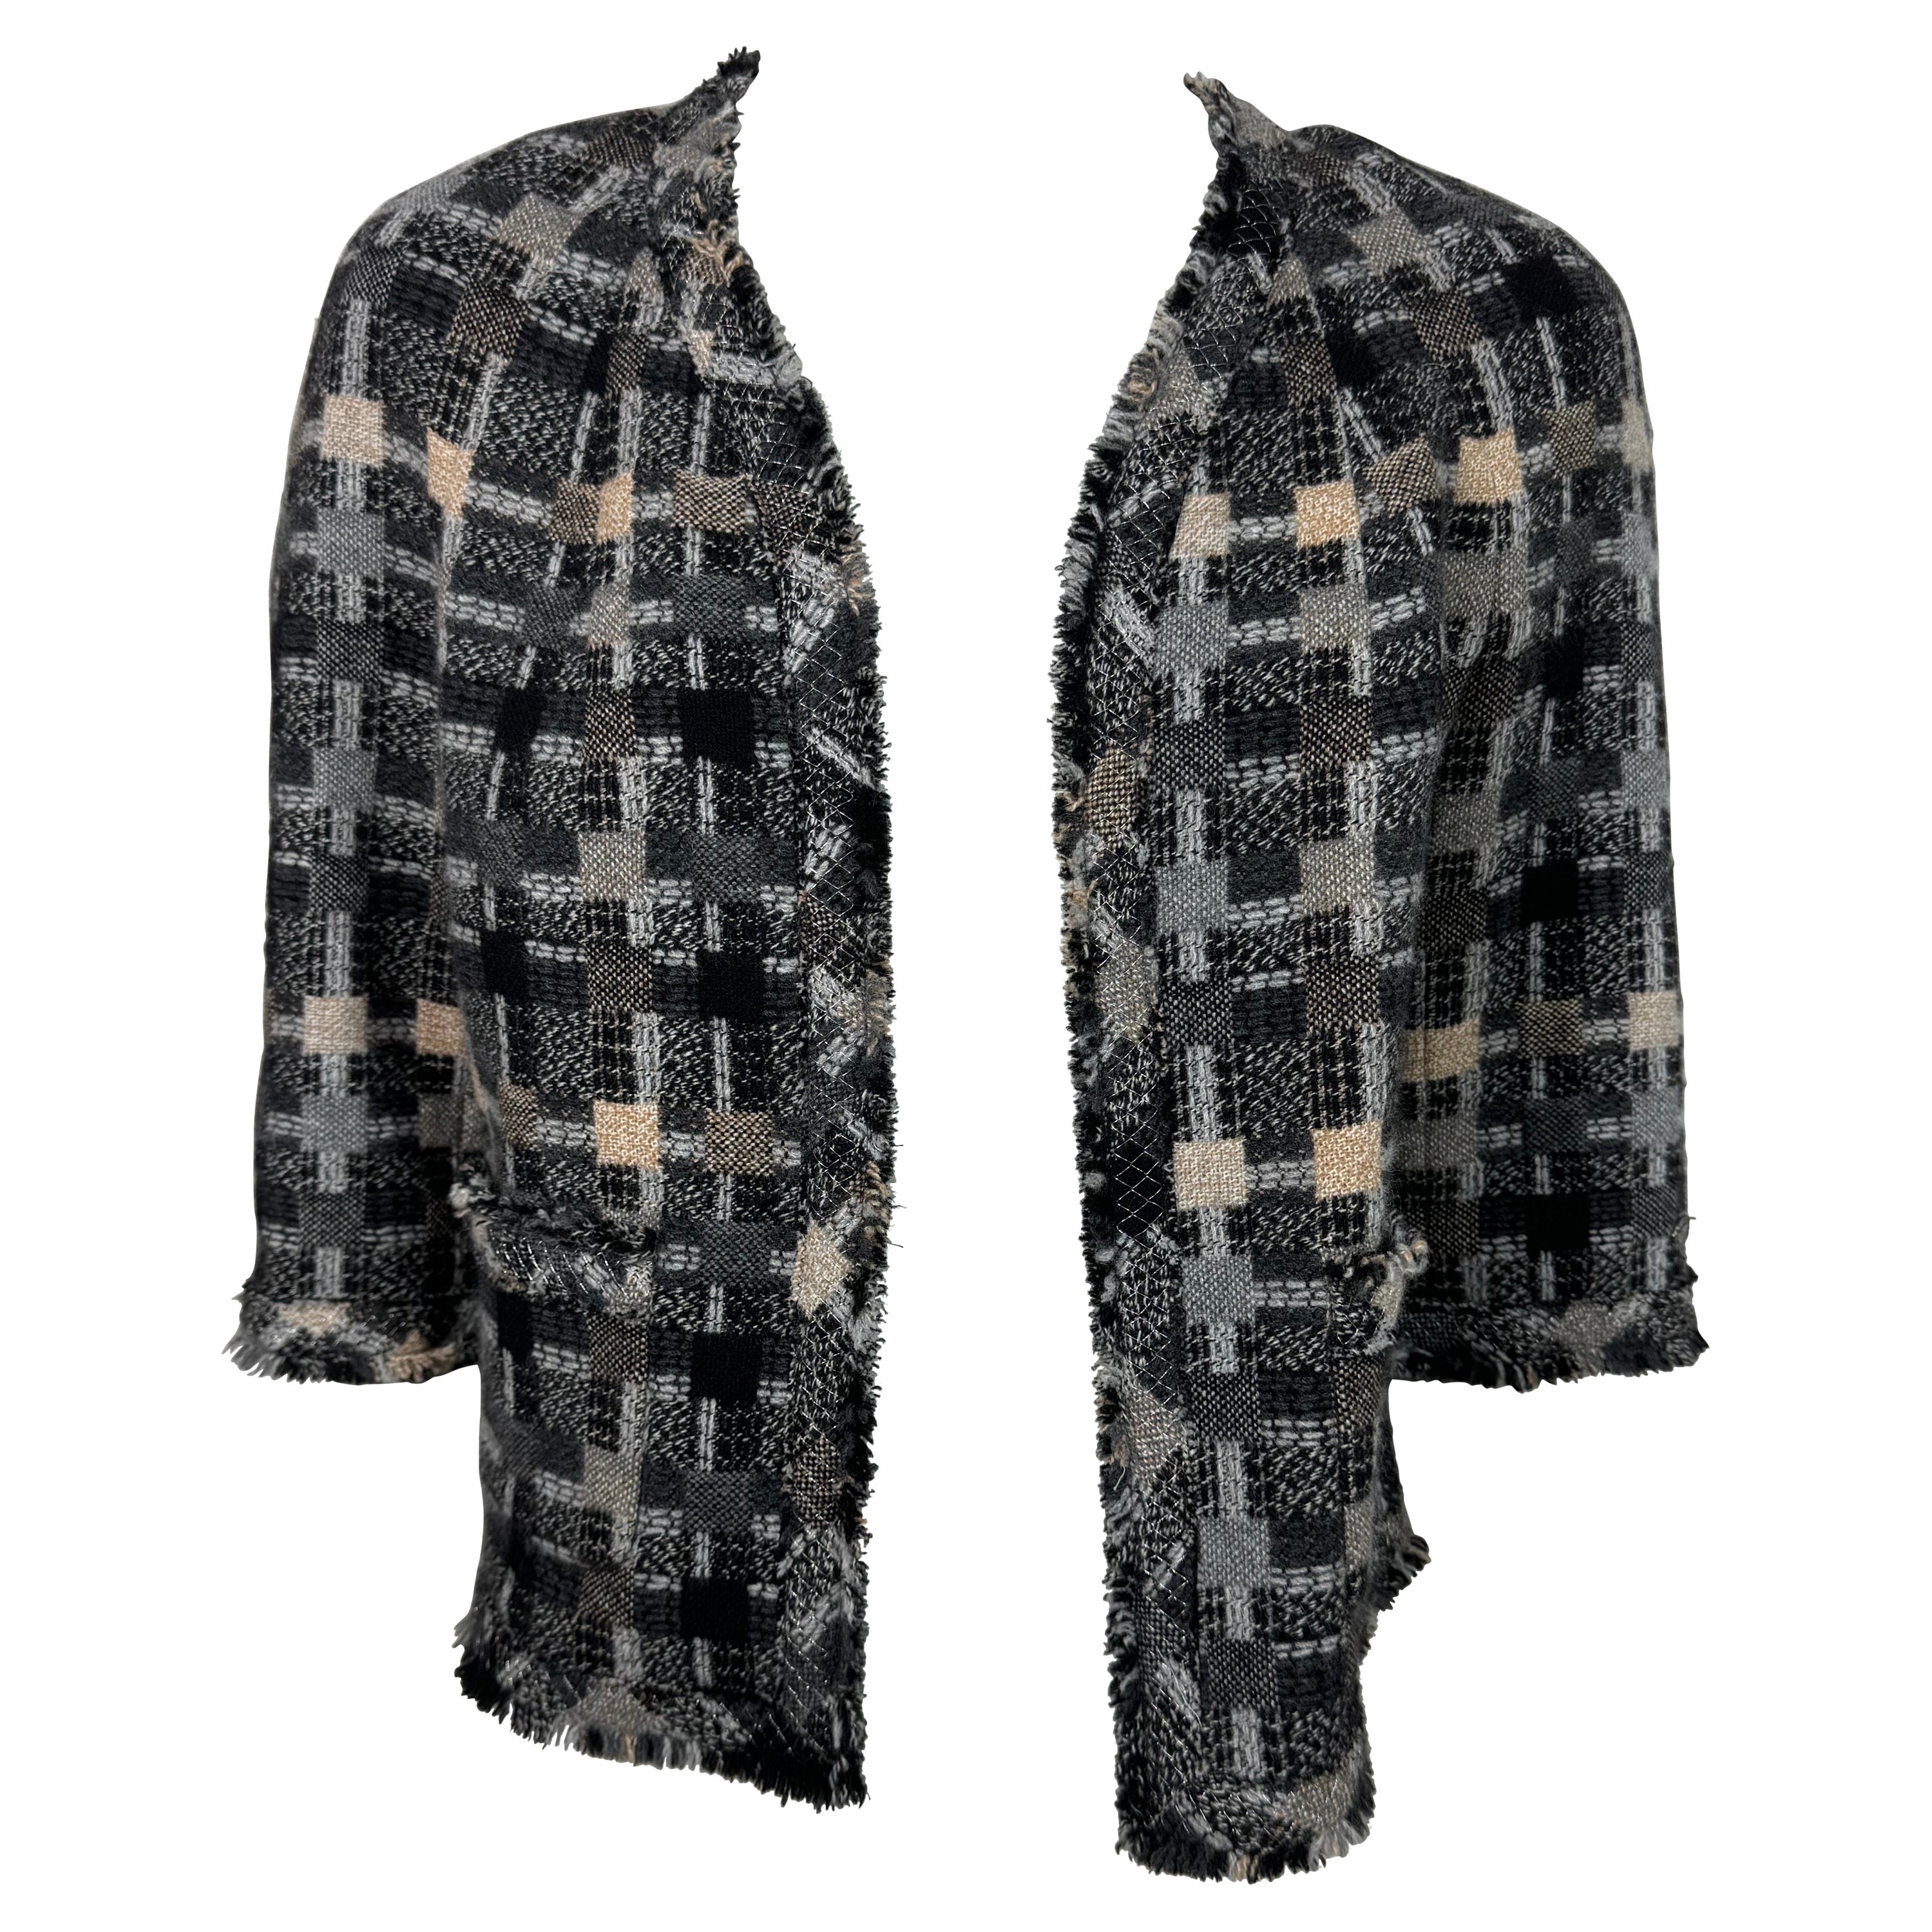 Chanel Vintage Fall 2005 Grey Tones Patterned 3/4 Sleeve Tweed Jacket - Size 42 For Sale